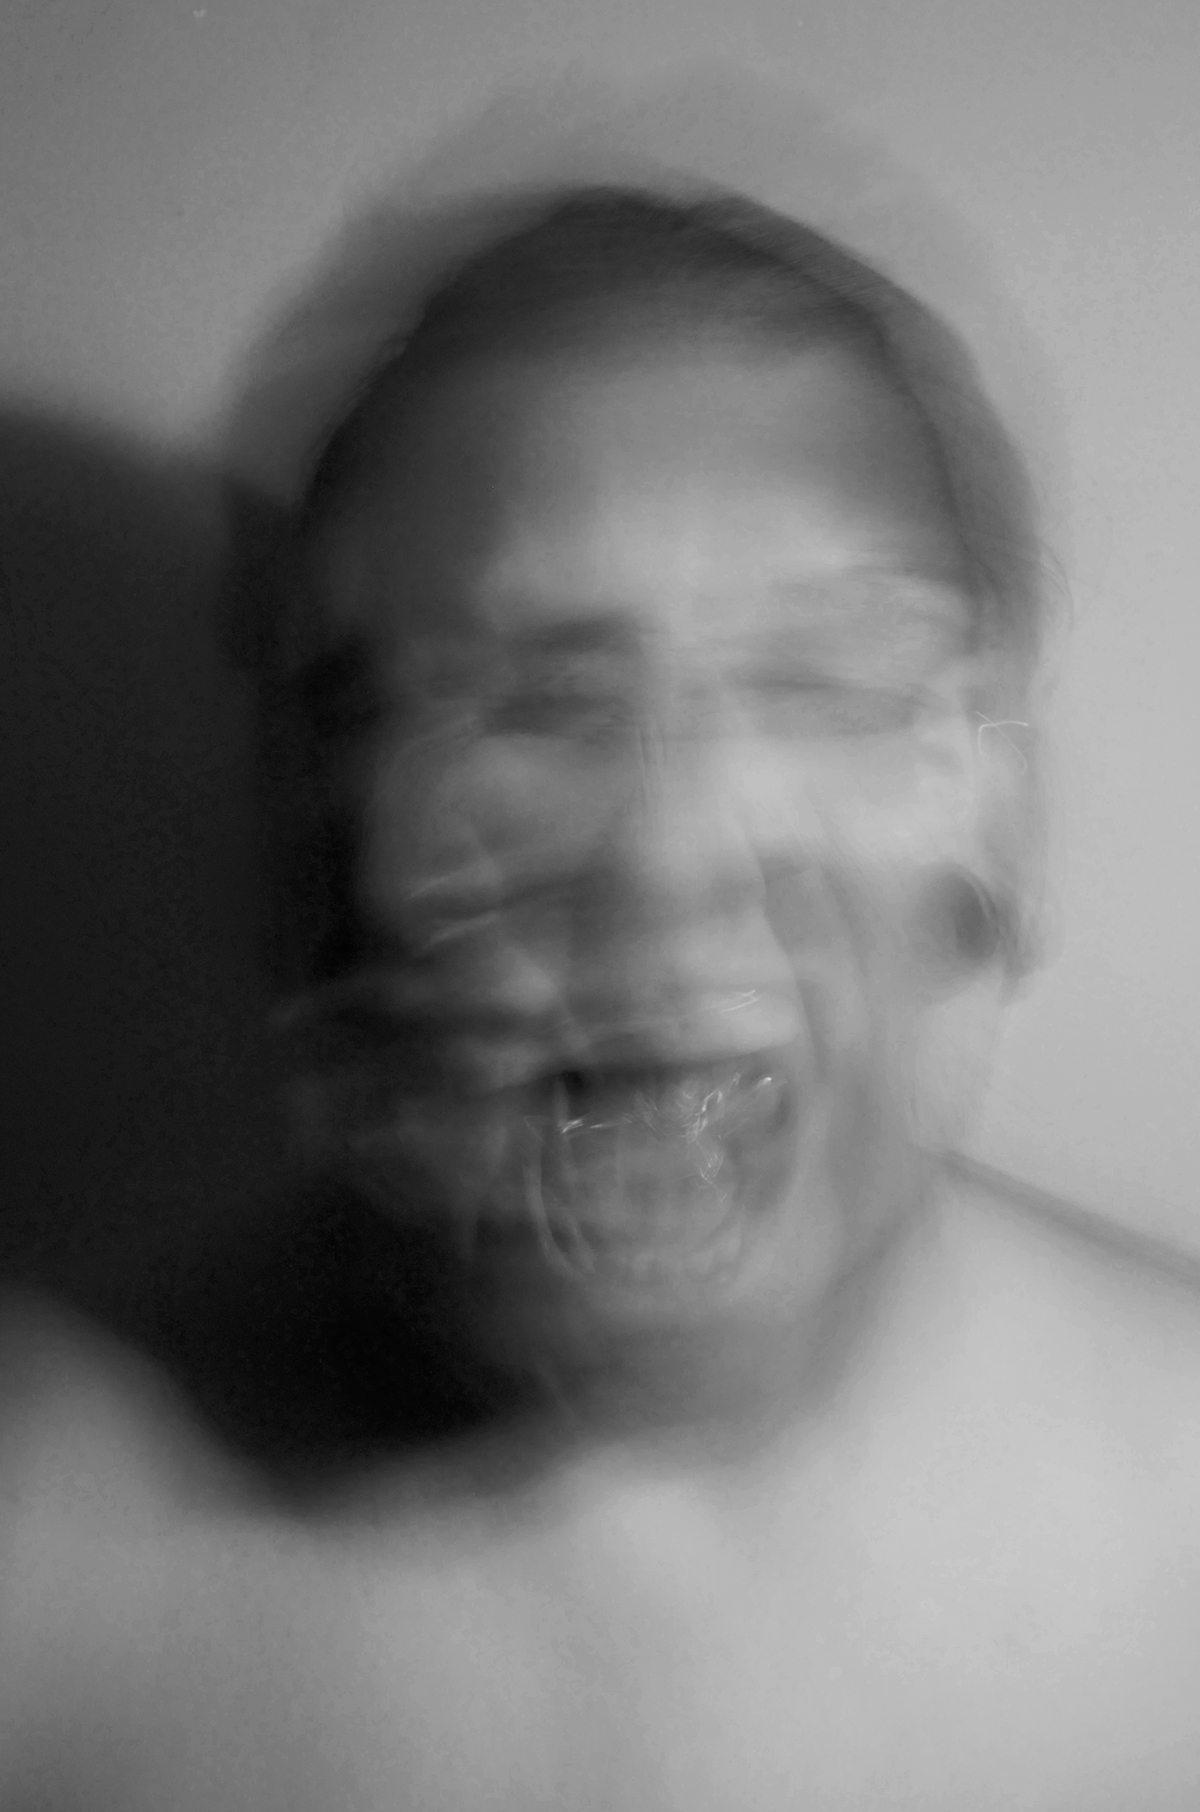 Study of emotions anger emotion motion blur photo series